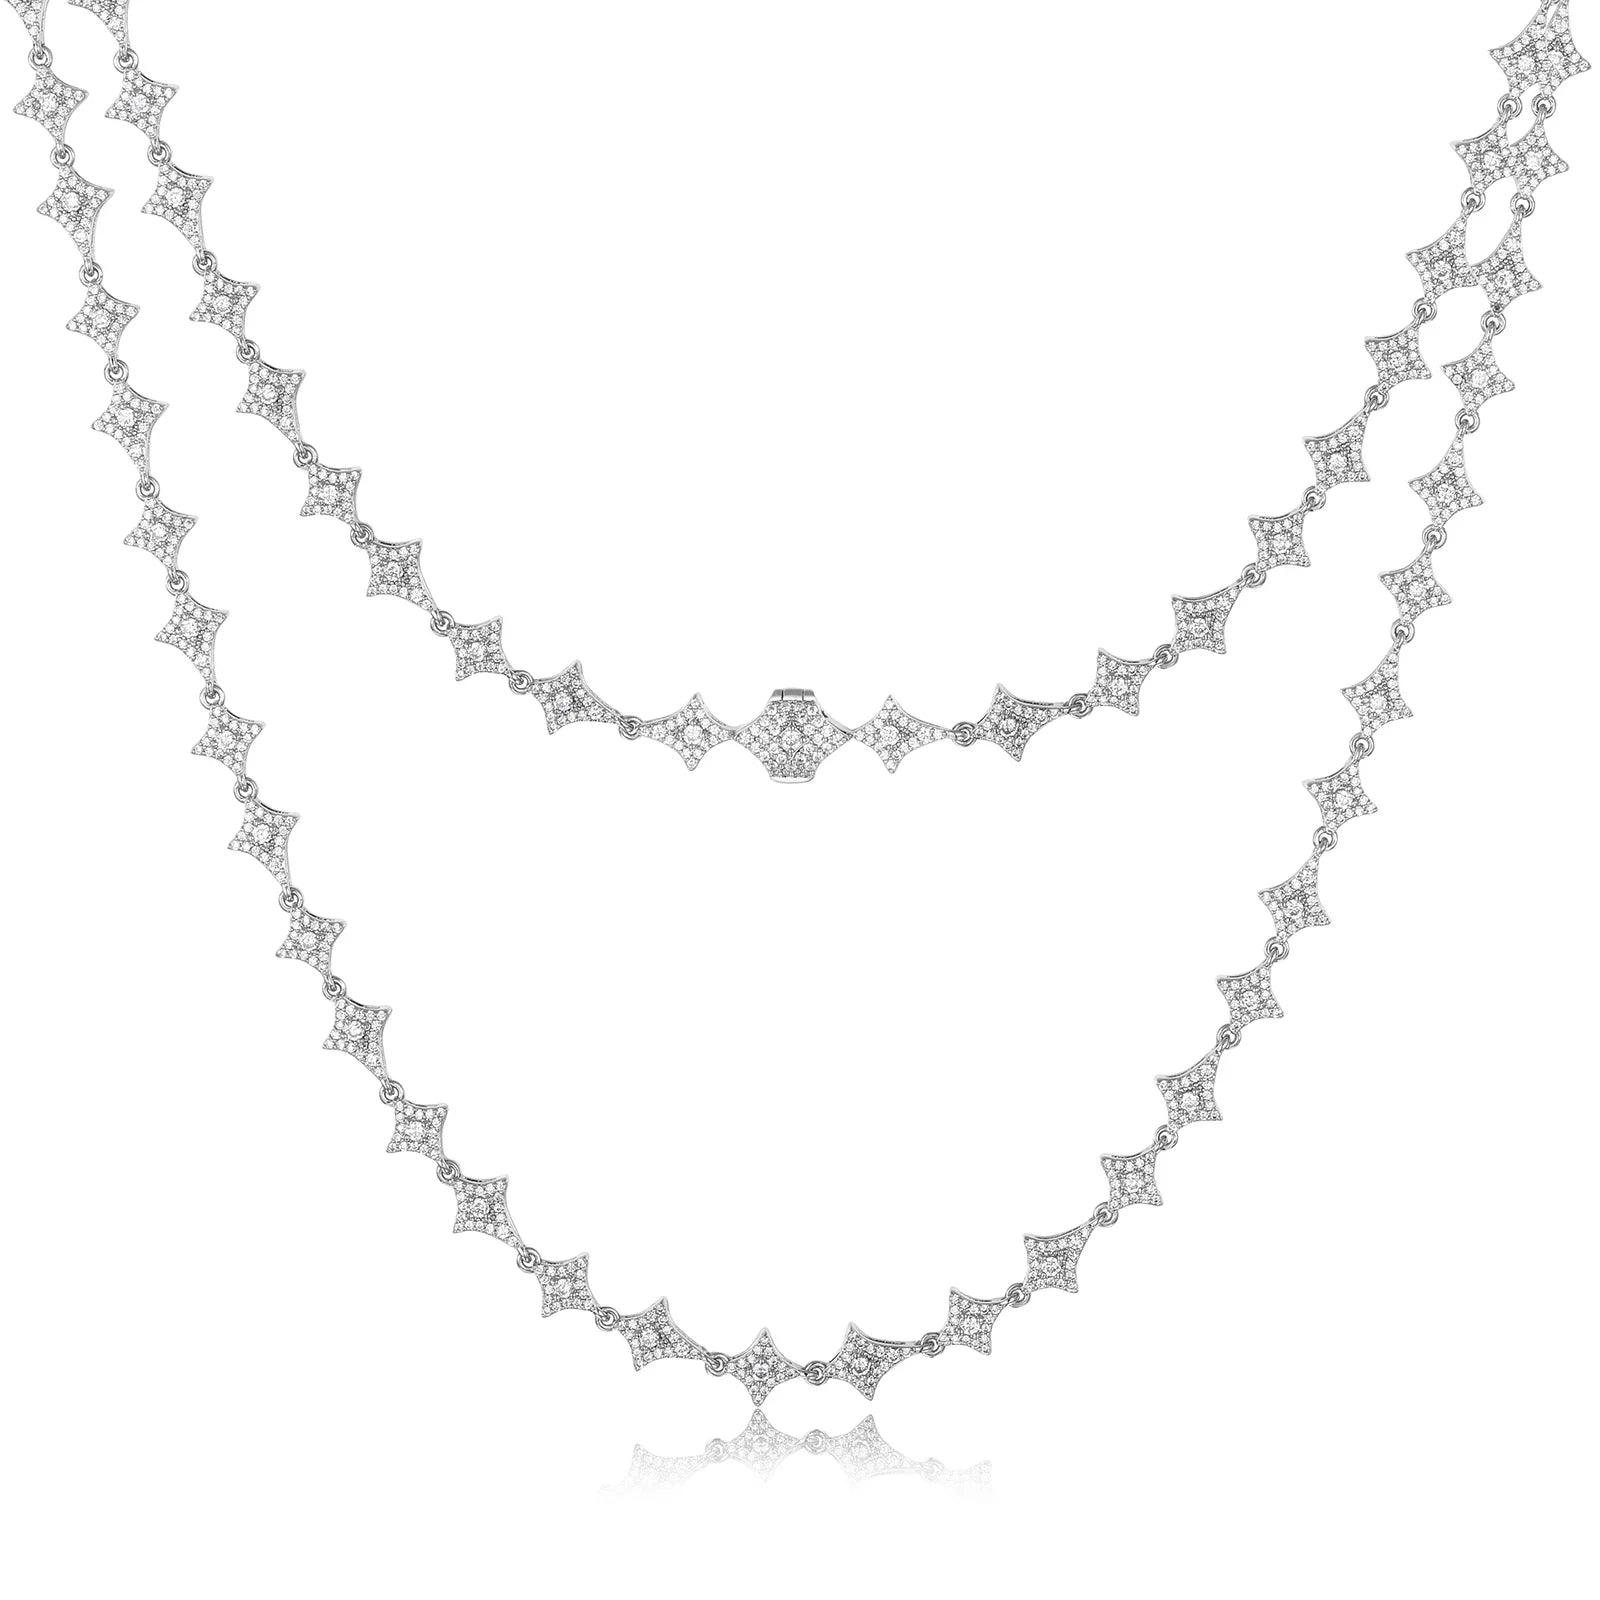 UltraLux™ Moissanite - Thistles & Thorns Necklace - Ice Dazzle